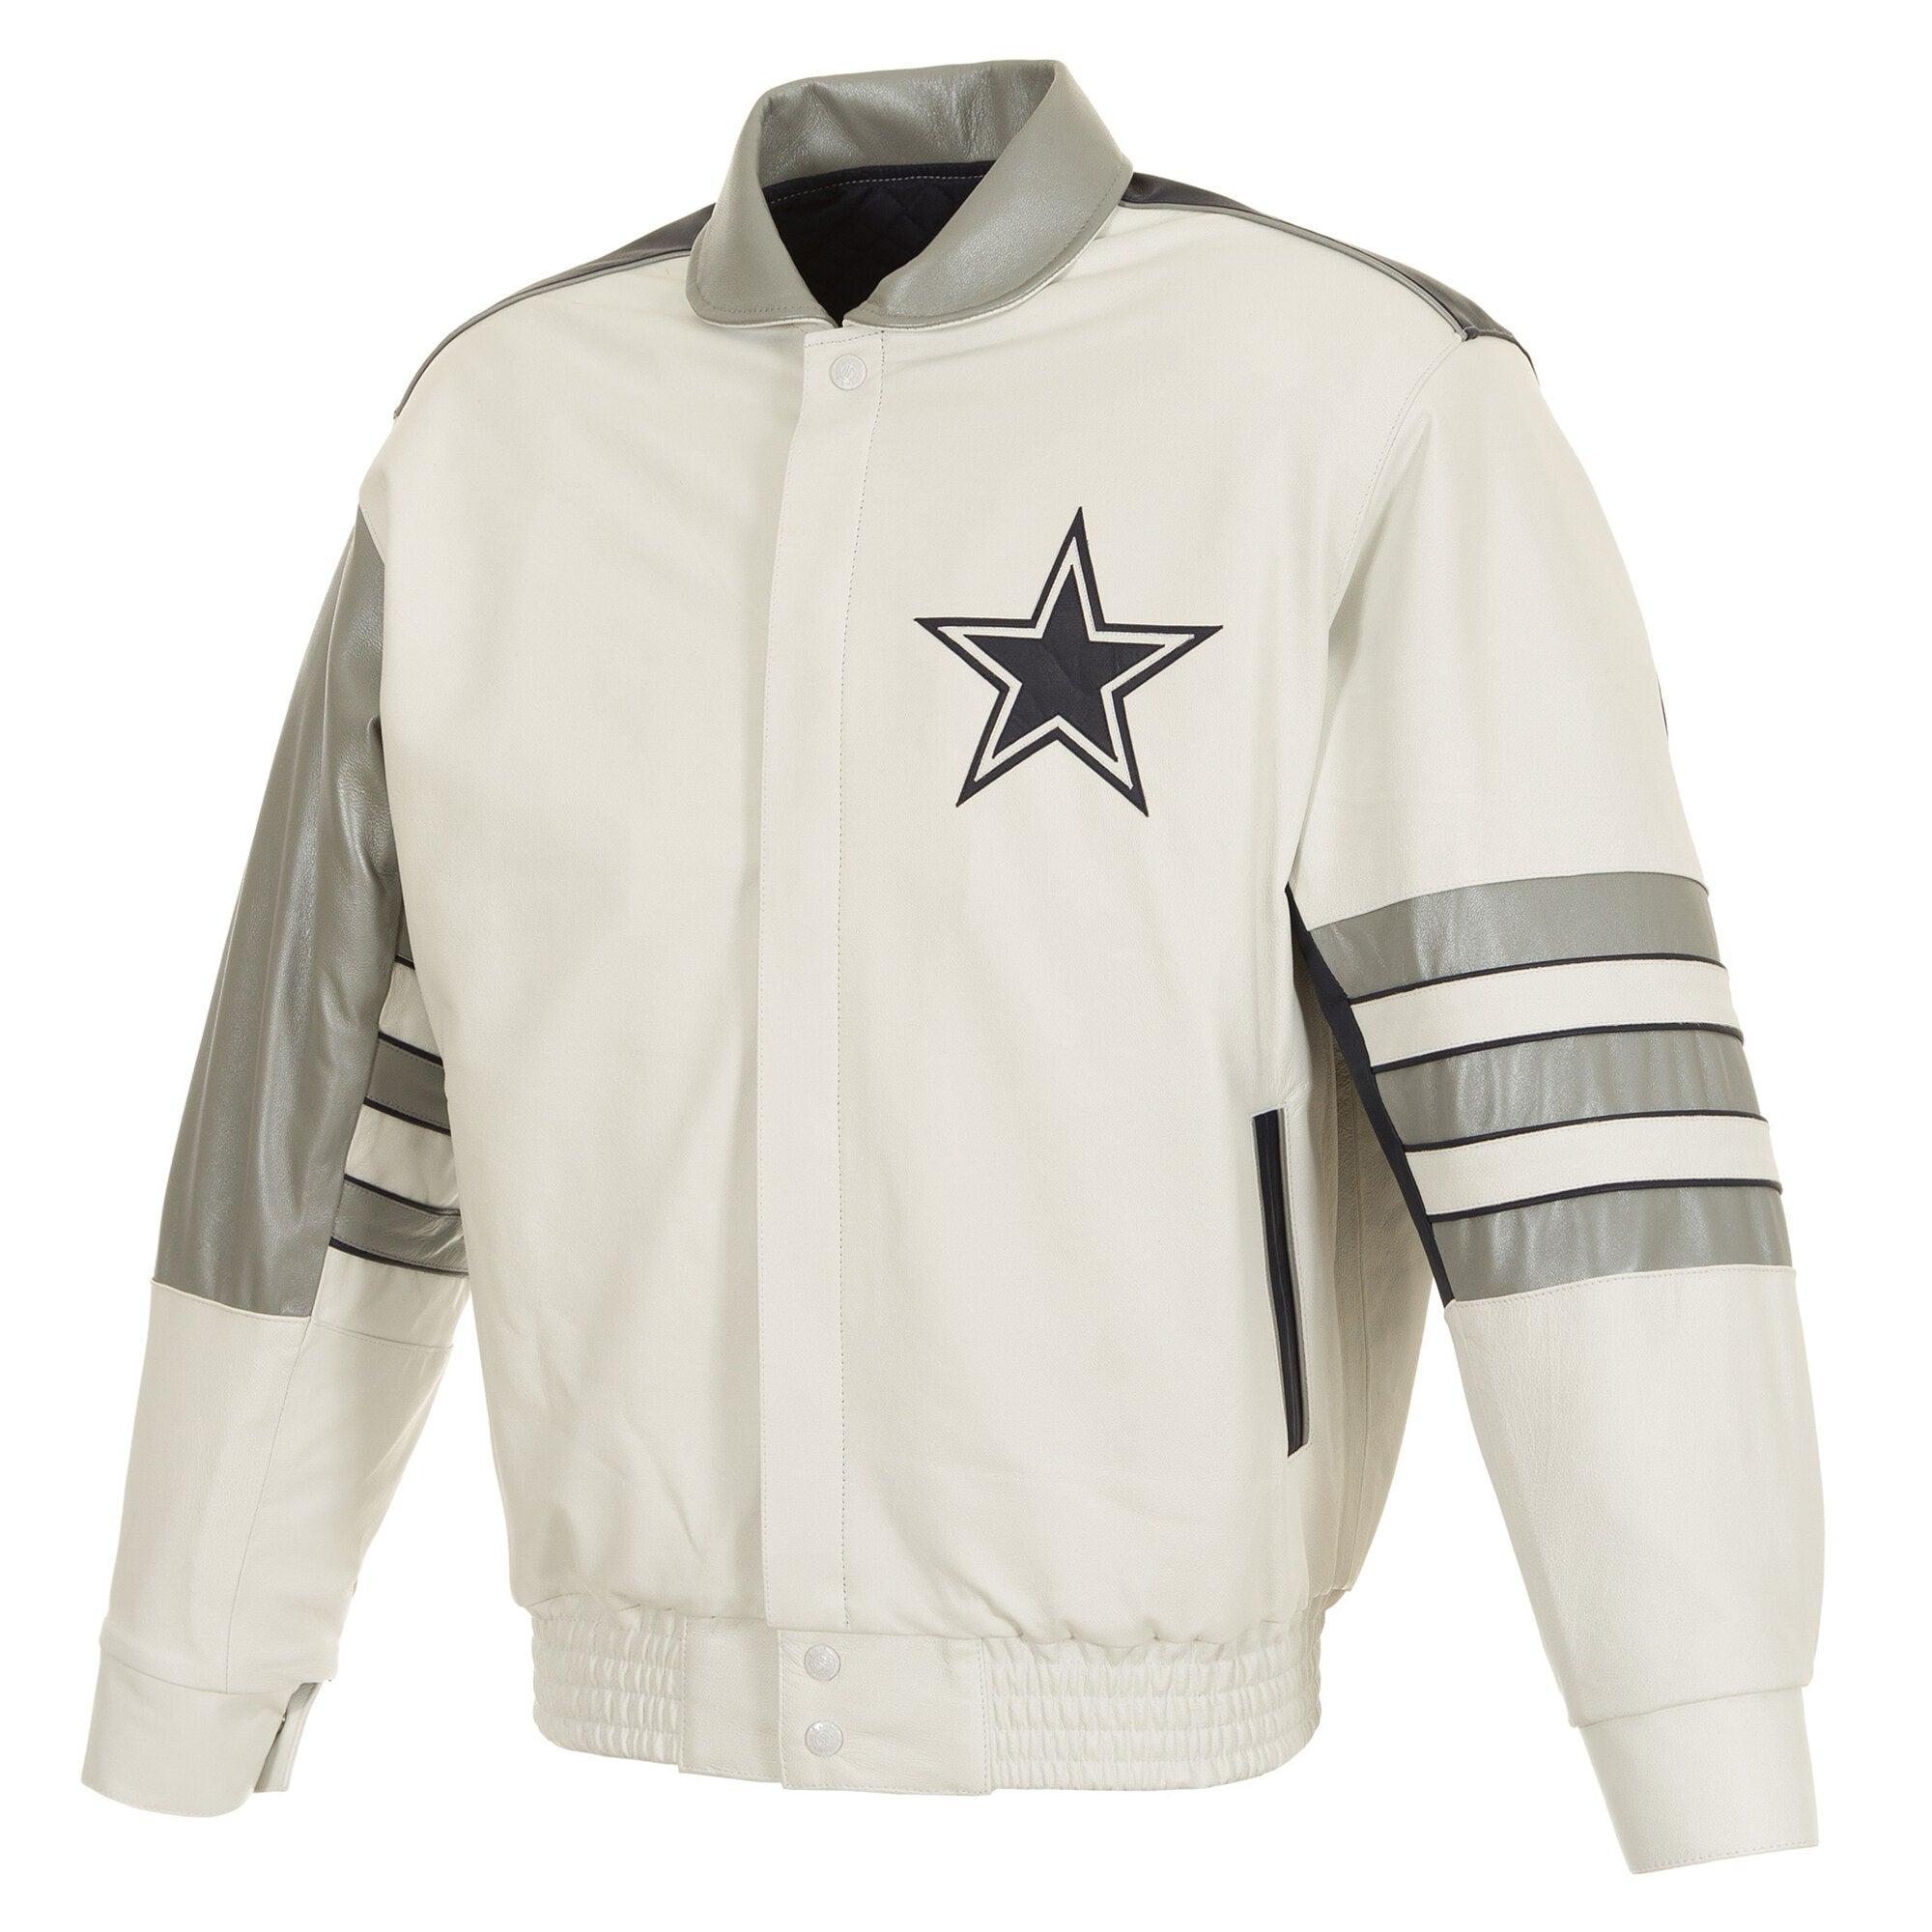 Dallas Cowboys JH Design Leather Jacket with Leather Applique - White Medium